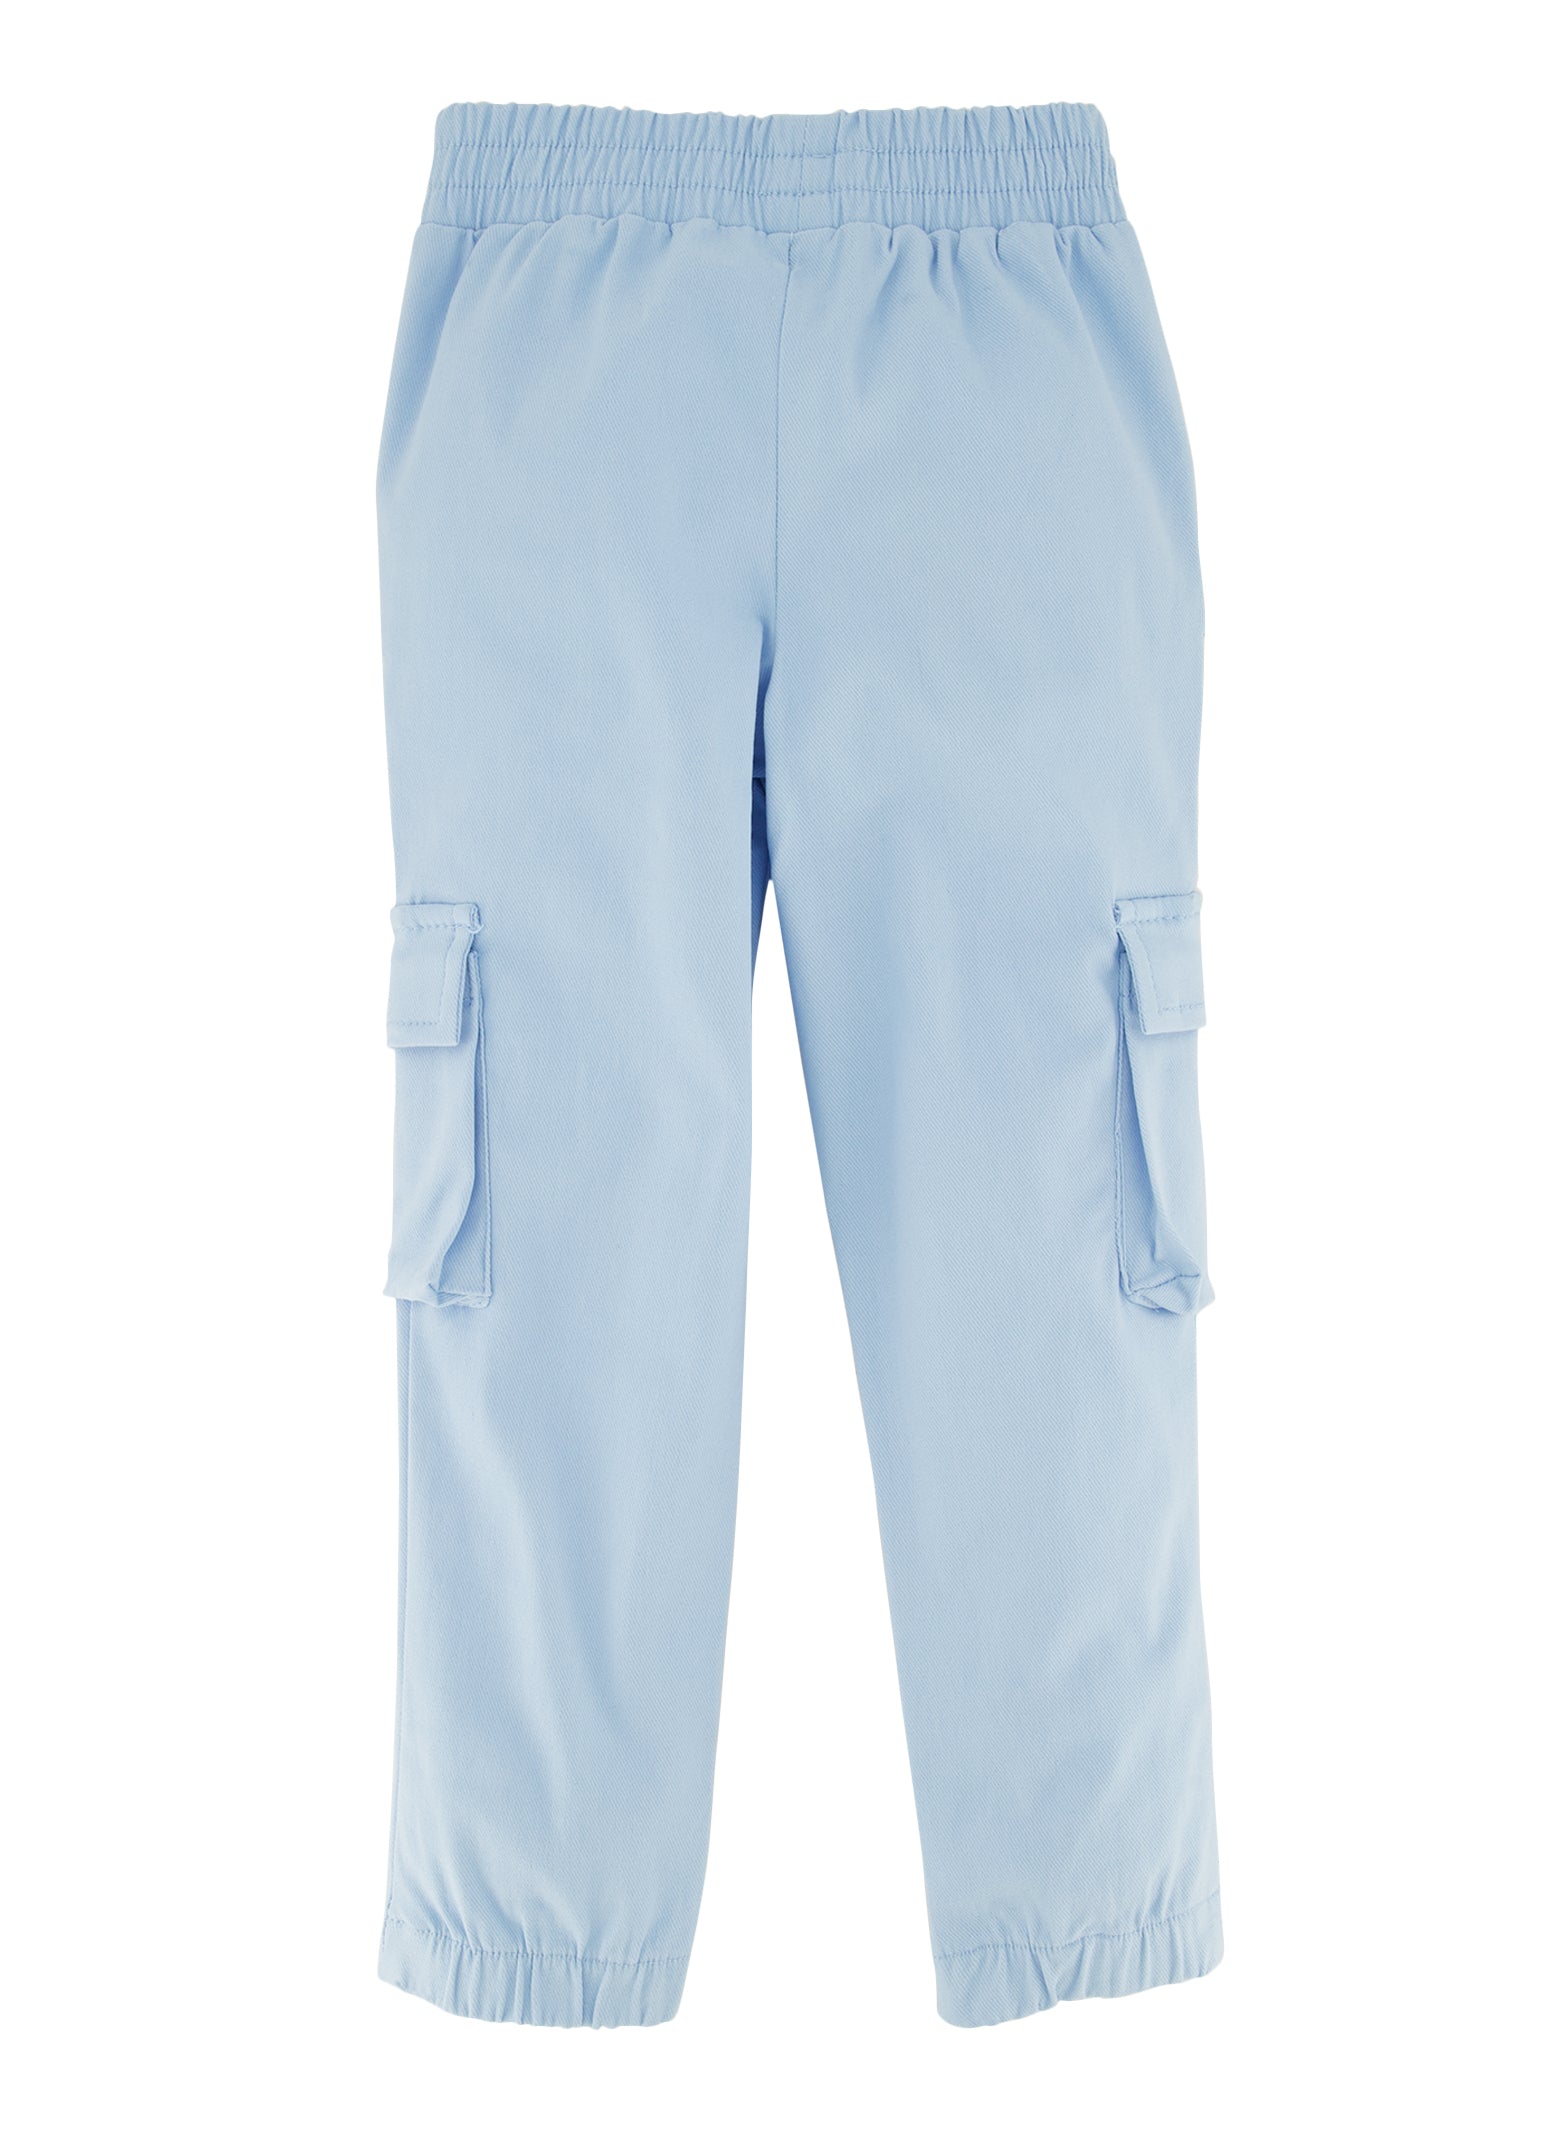 Little Girls Stacked Cargo Pocket Hyperstretch Pants - Baby Blue